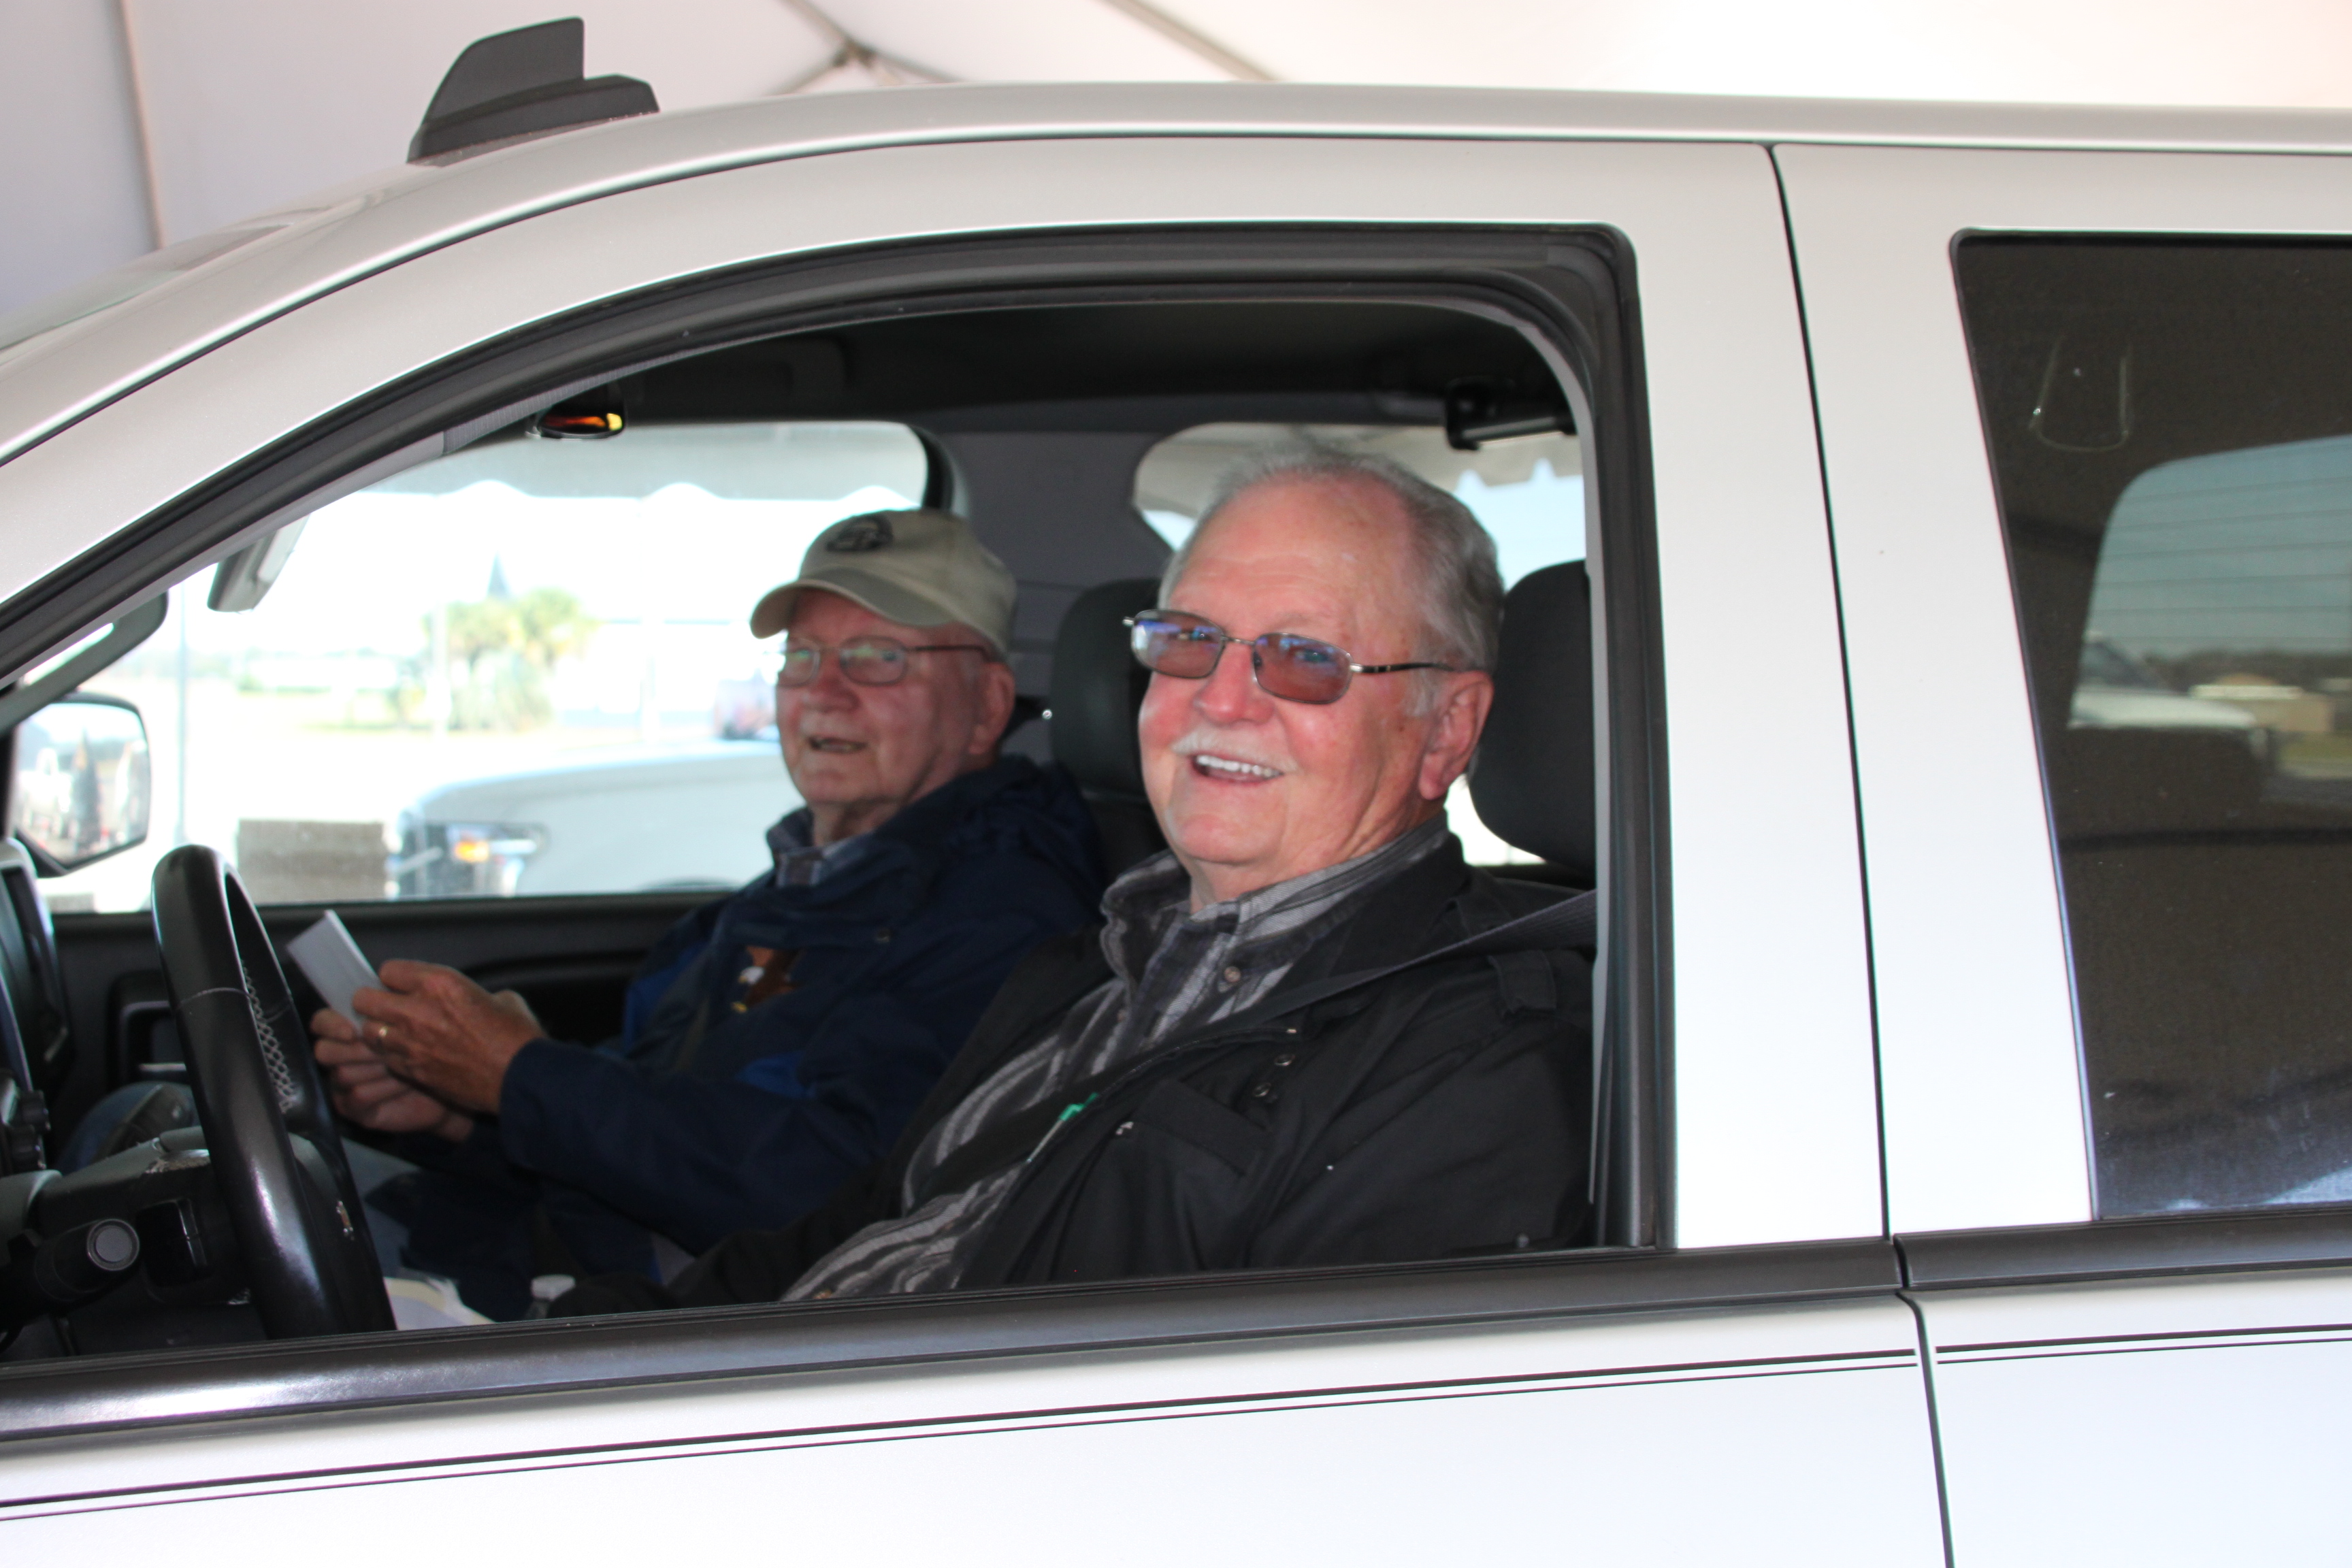 Two EMC members inside of a truck, smiling at the camera through the driver's side window